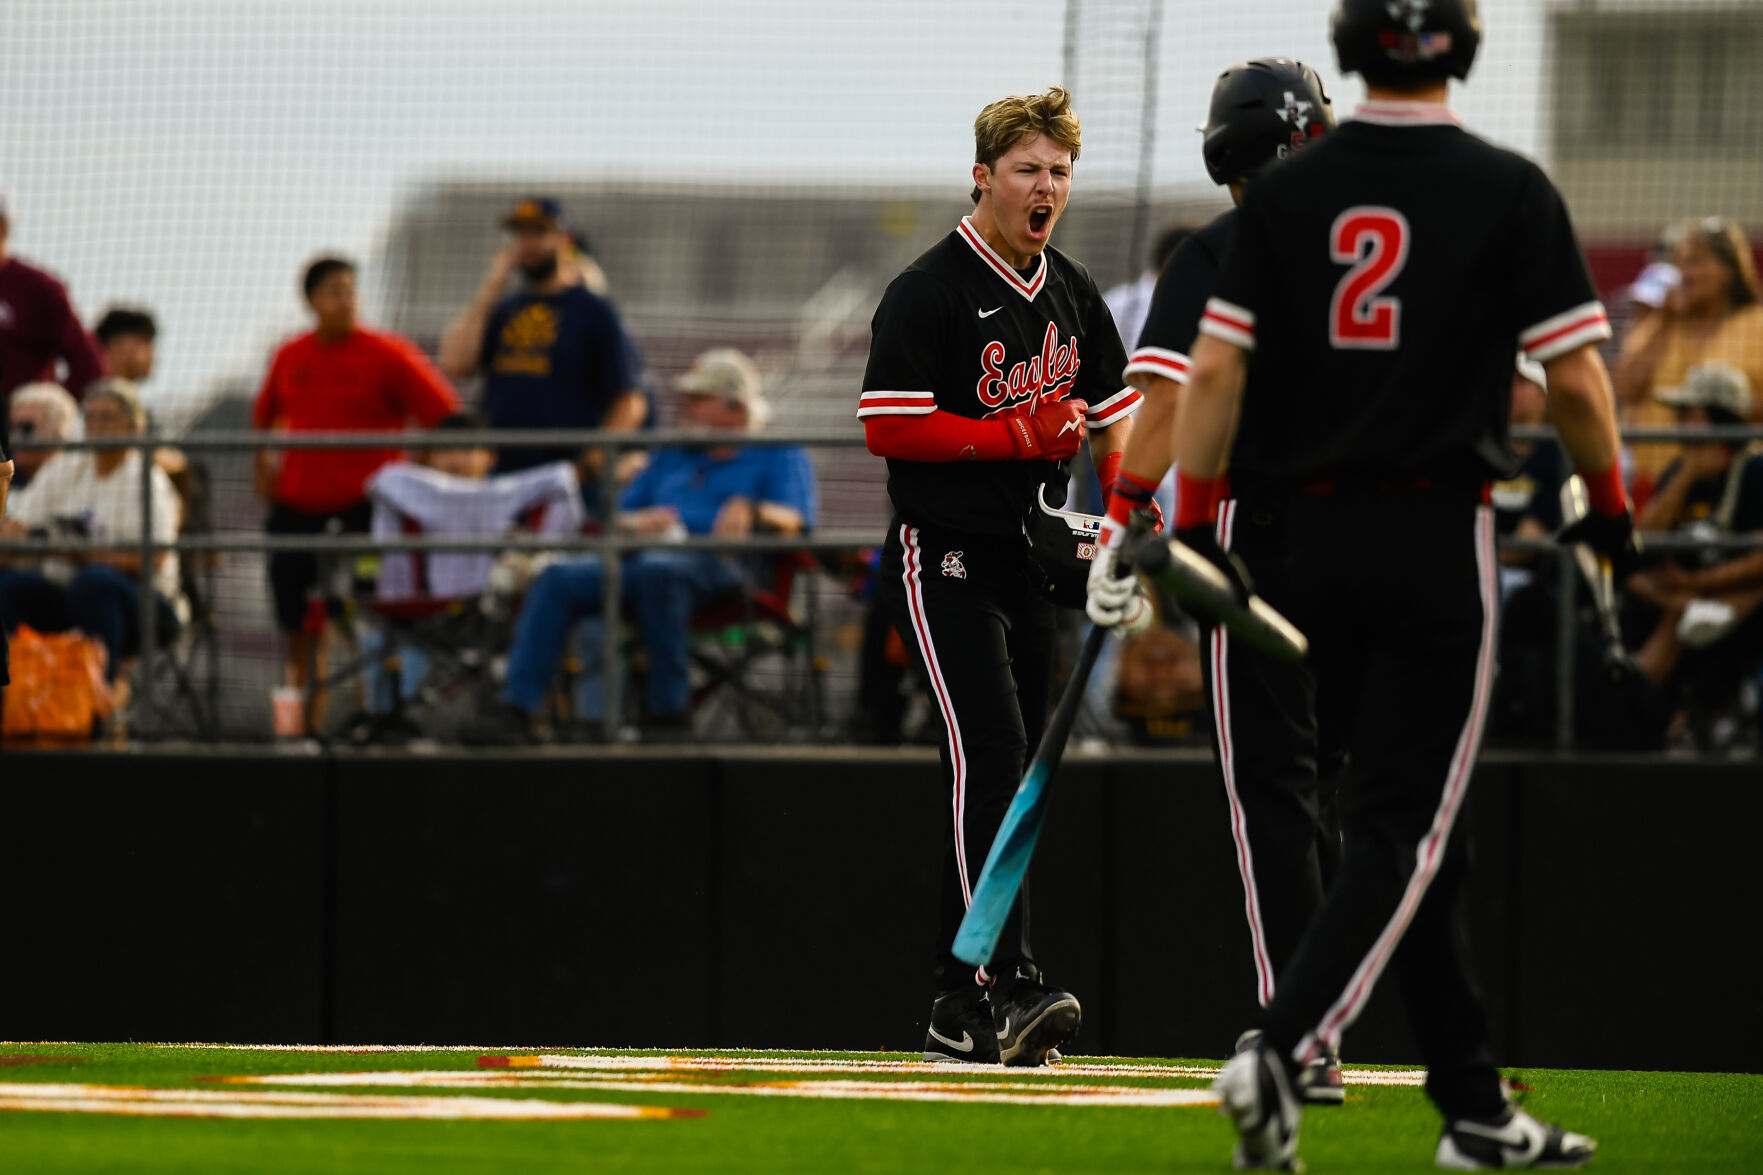 Argyle Baseball Advances With Game-Winning Hit by Jaxon Casselberry